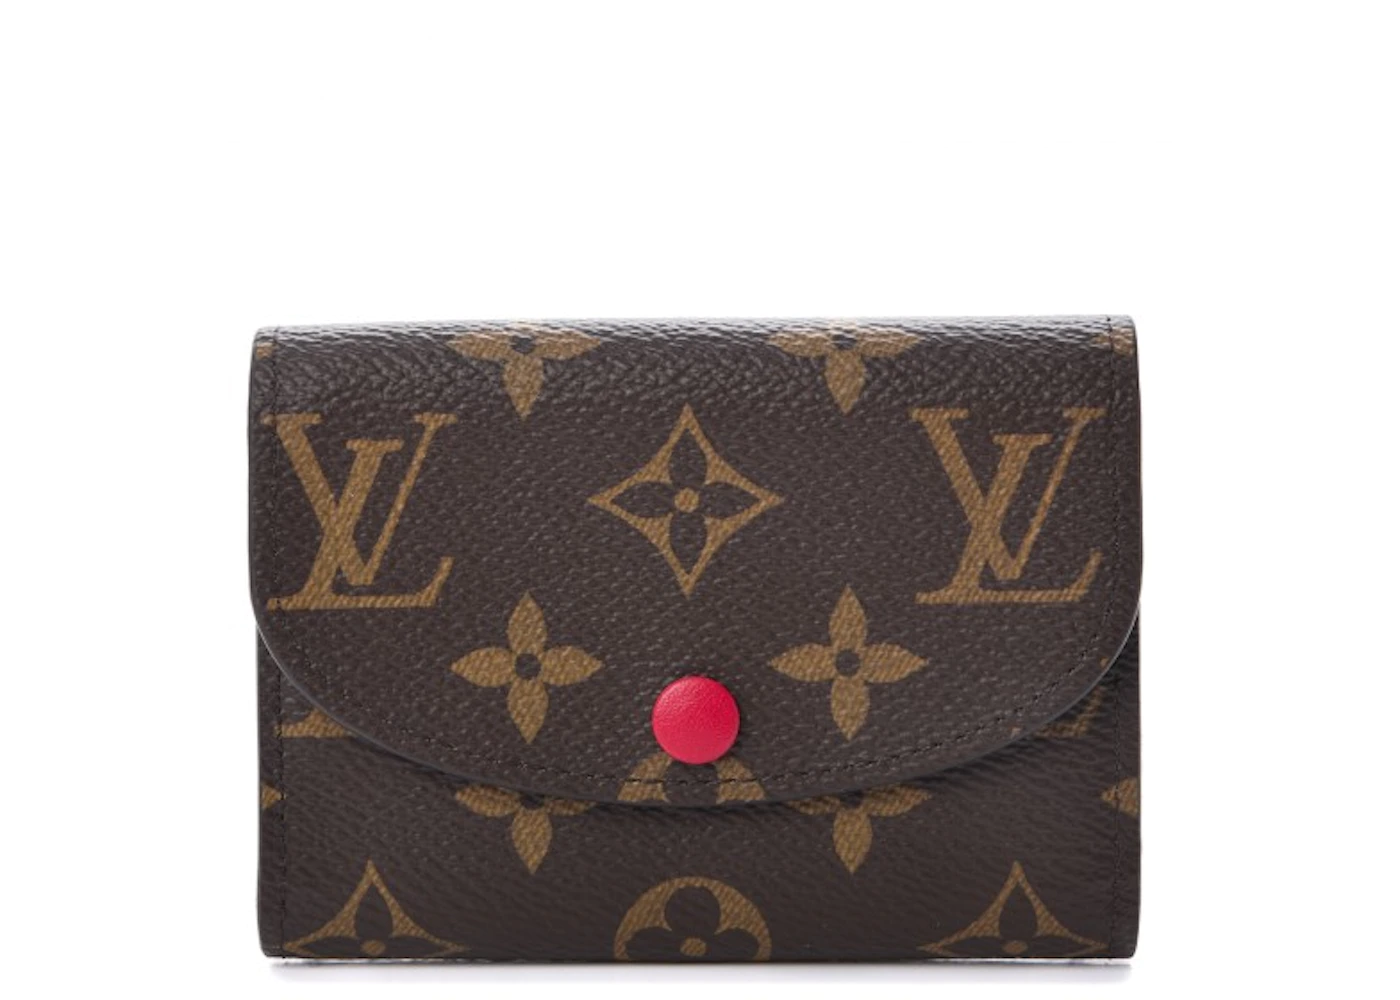 100+ affordable lv rosalie coin purse For Sale